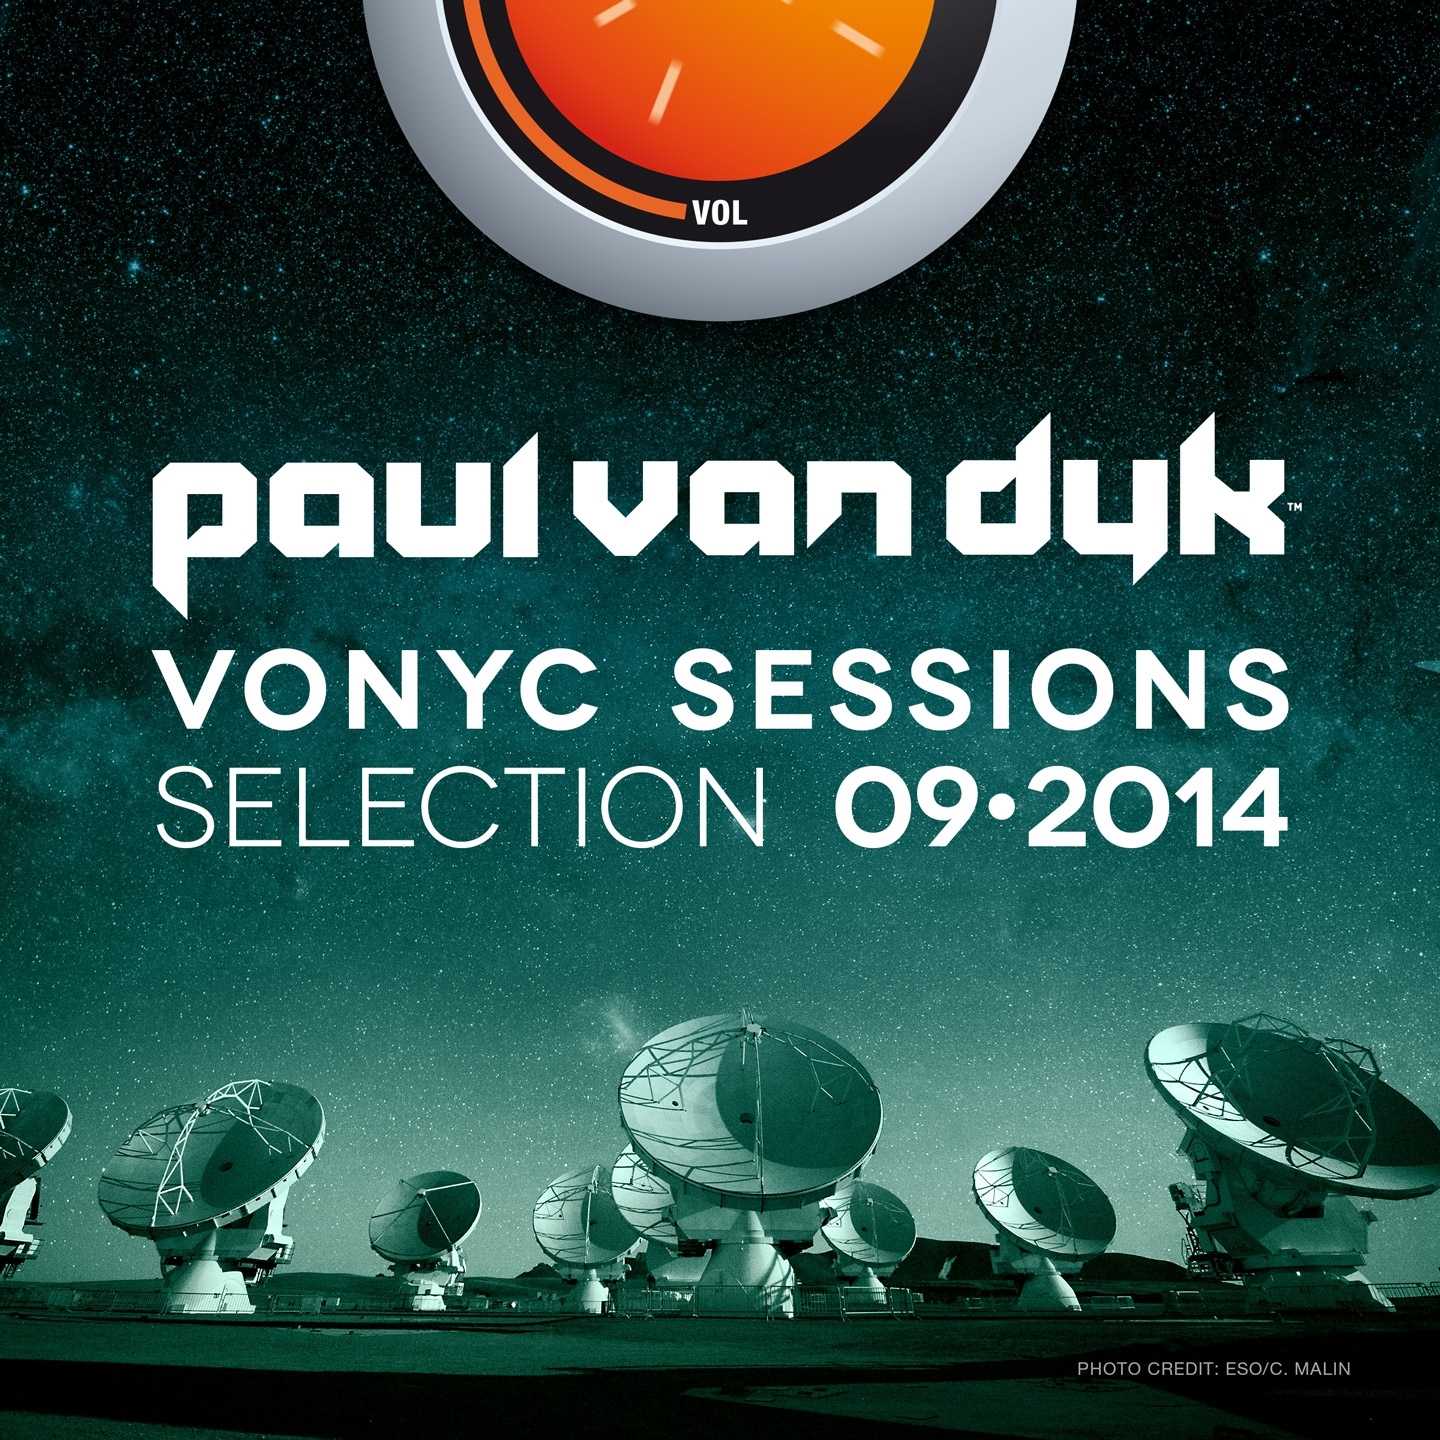 Come With Me (We Are One 2014) (Paul Van Dyk Festival Mix)